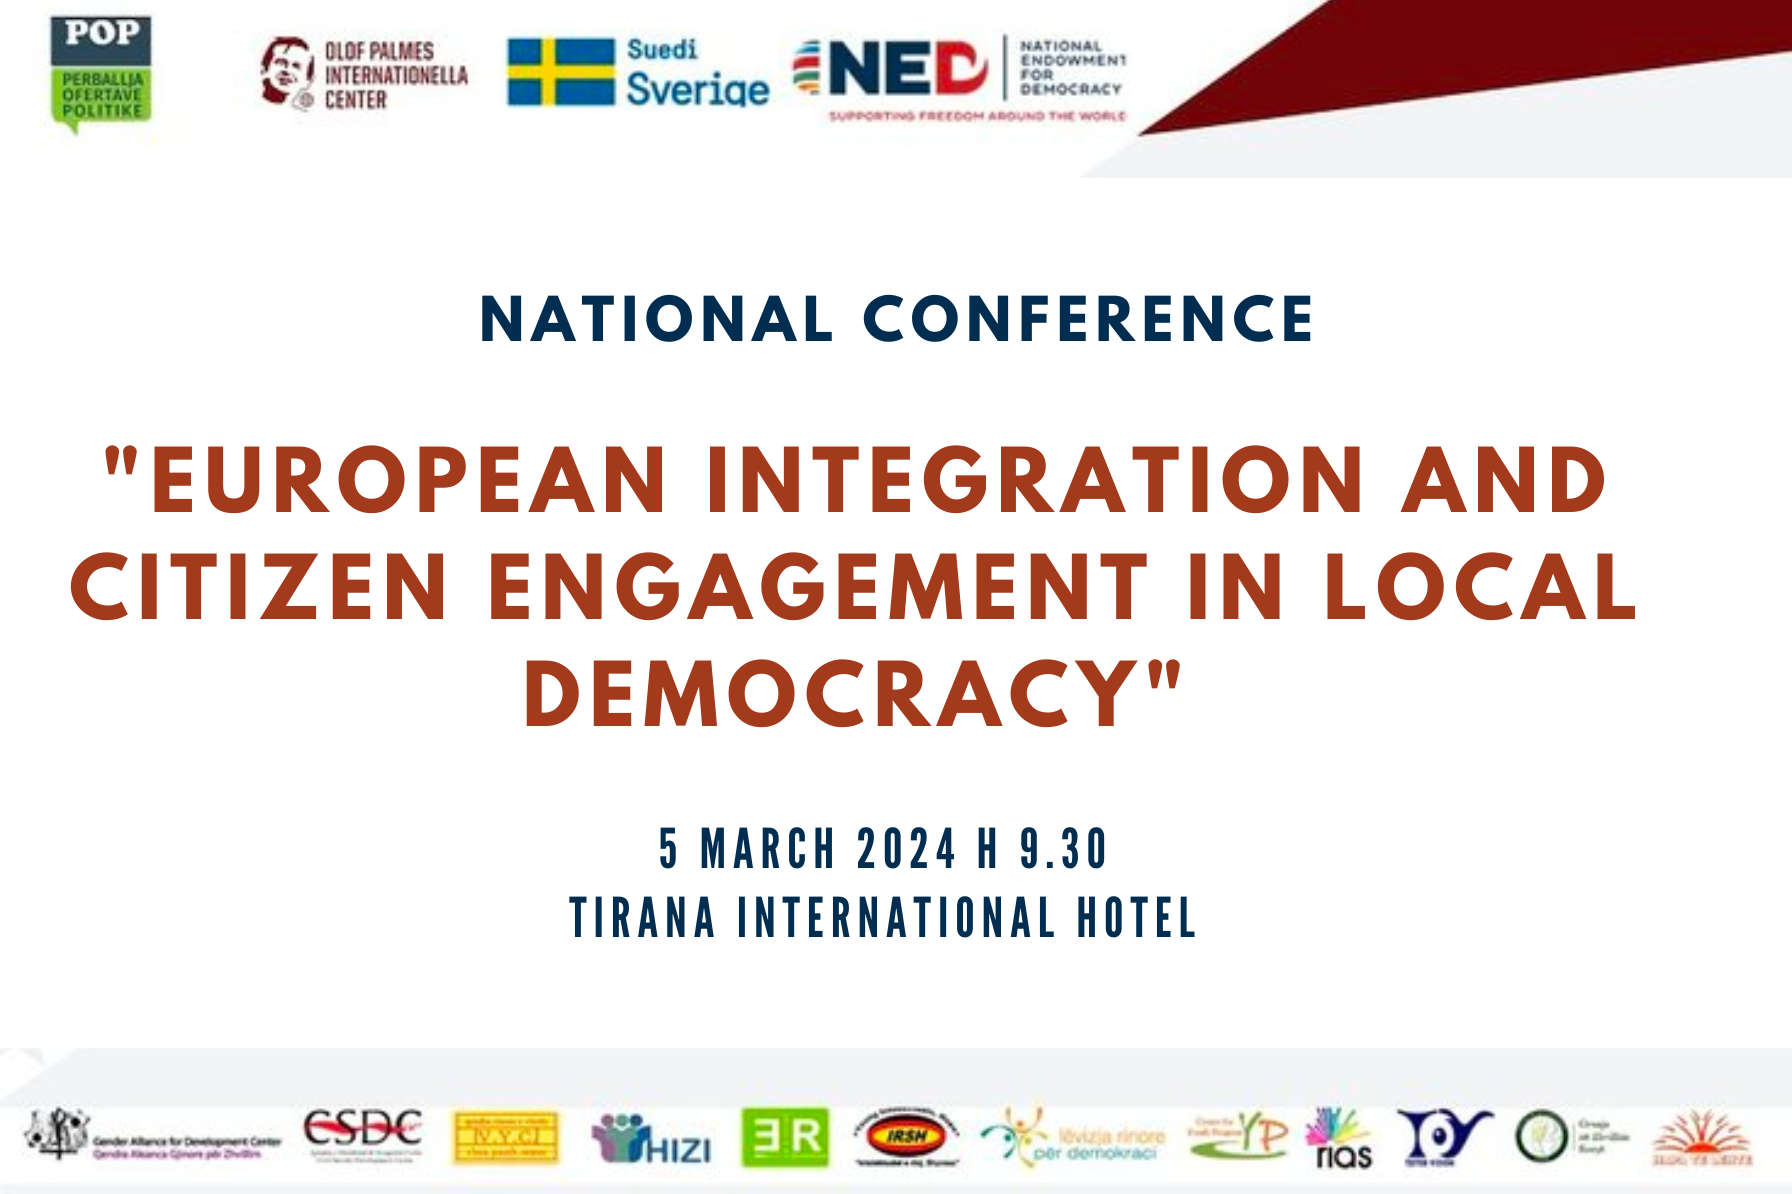 National Conference "European Integration and Citizen Engagement in Local Democracy"